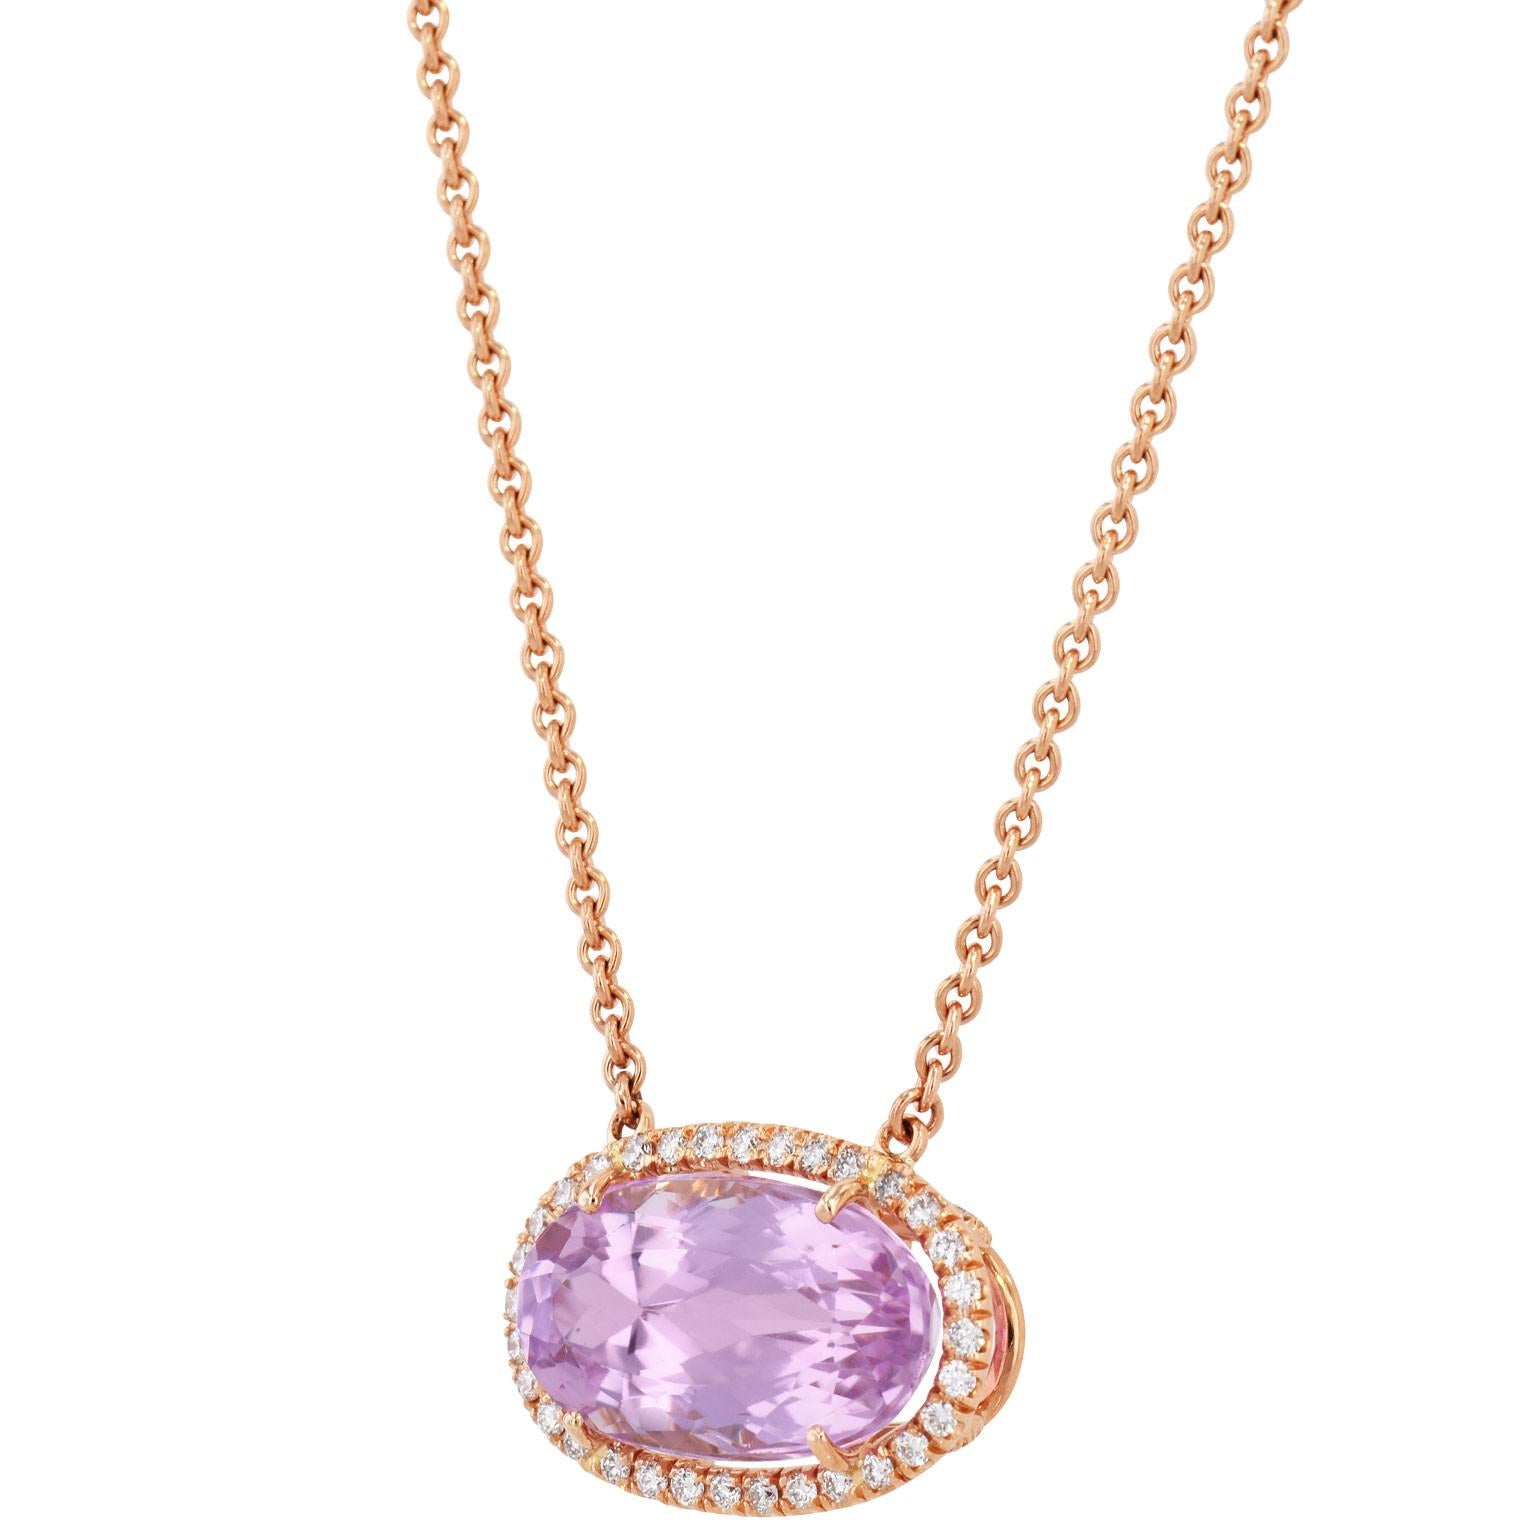 Handmade 18kt Rose Kunzite Pendant 

Handmade 18 karat rose gold Kunzite Pendant. The elongated oval Kunzite is set east to west with a total weight of 11.24 carats. The Kunzite has diamond pave set around the stone and on the basket detail with a